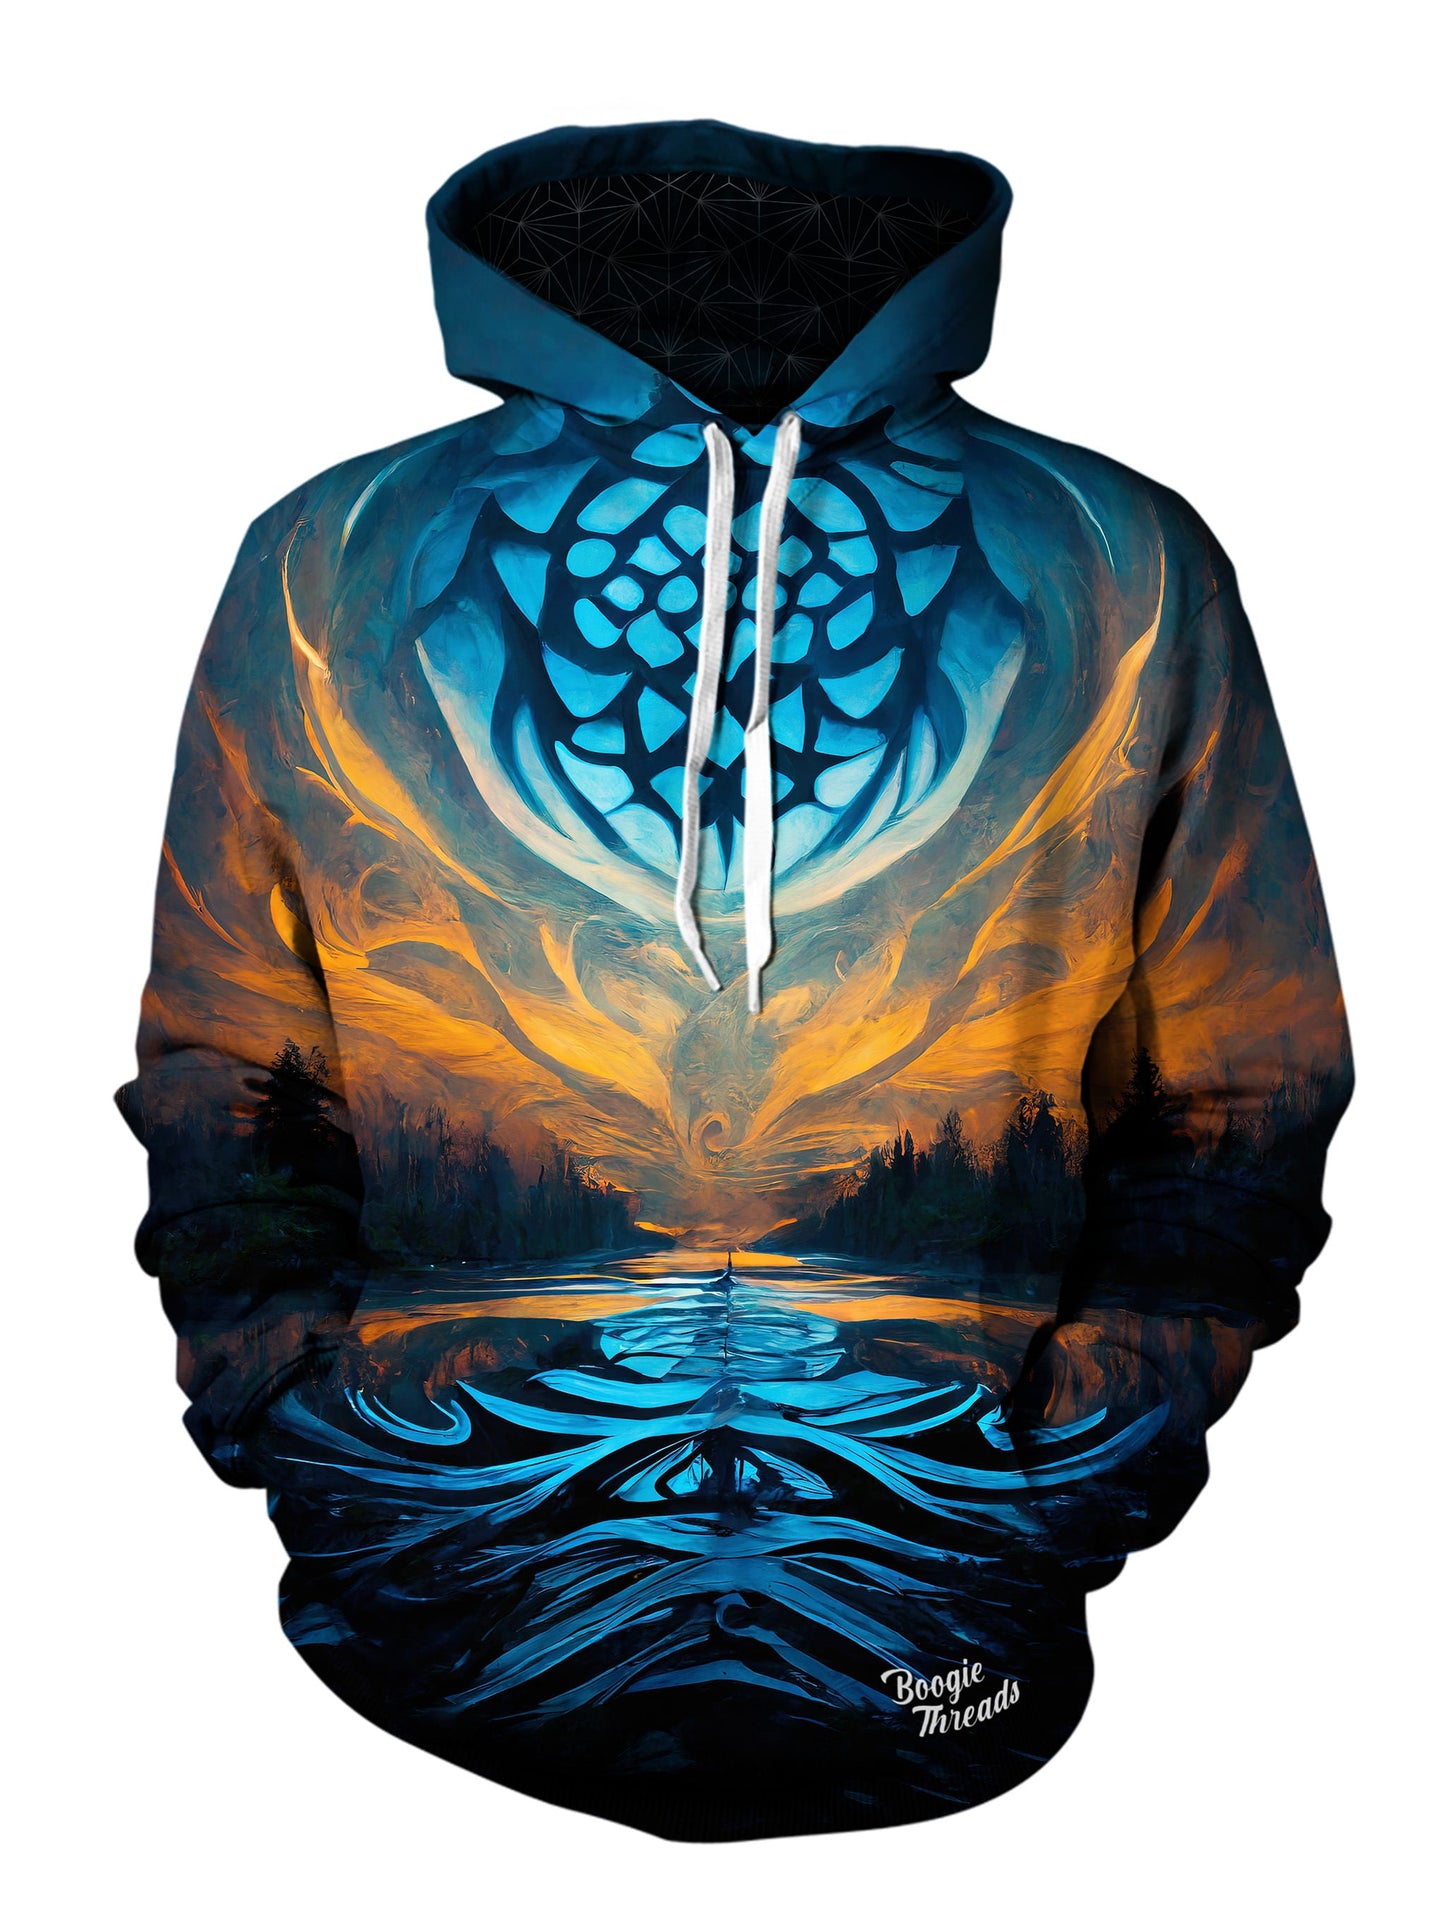 Auspicious Aftermath Unisex Pullover Hoodie - EDM Festival Clothing - Boogie Threads